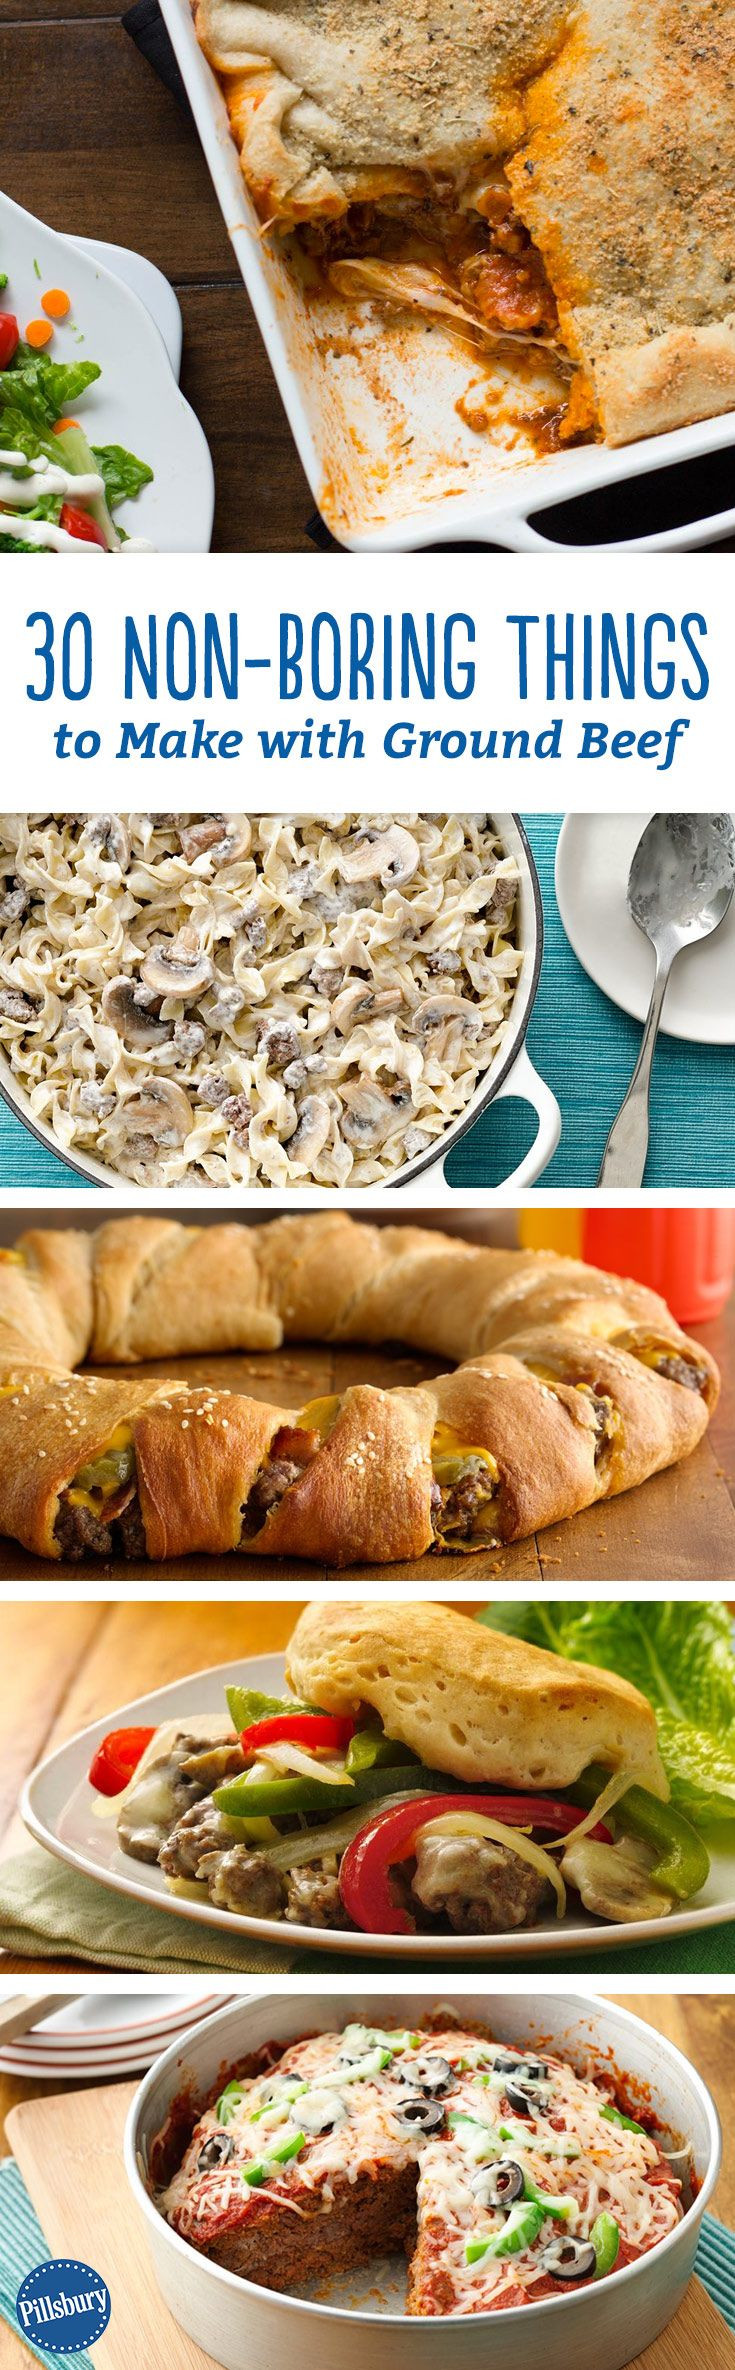 Stuff To Make With Ground Beef
 30 Non Boring Things to Make with Ground Beef